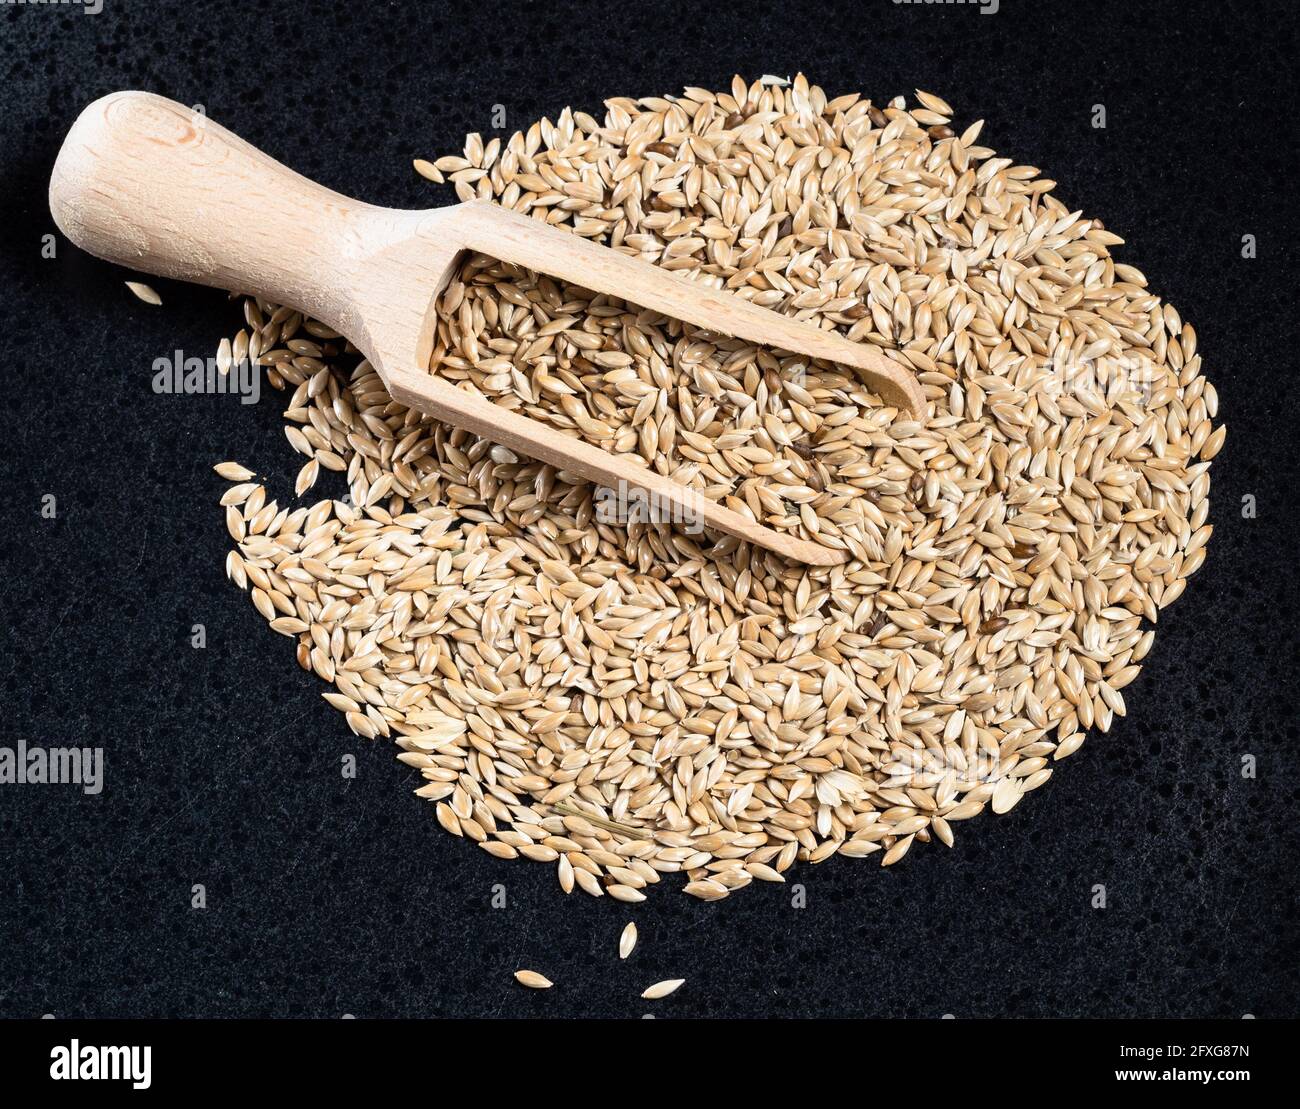 top view of wood scoop on pile of unhulled scagliola canary seeds on black plate Stock Photo